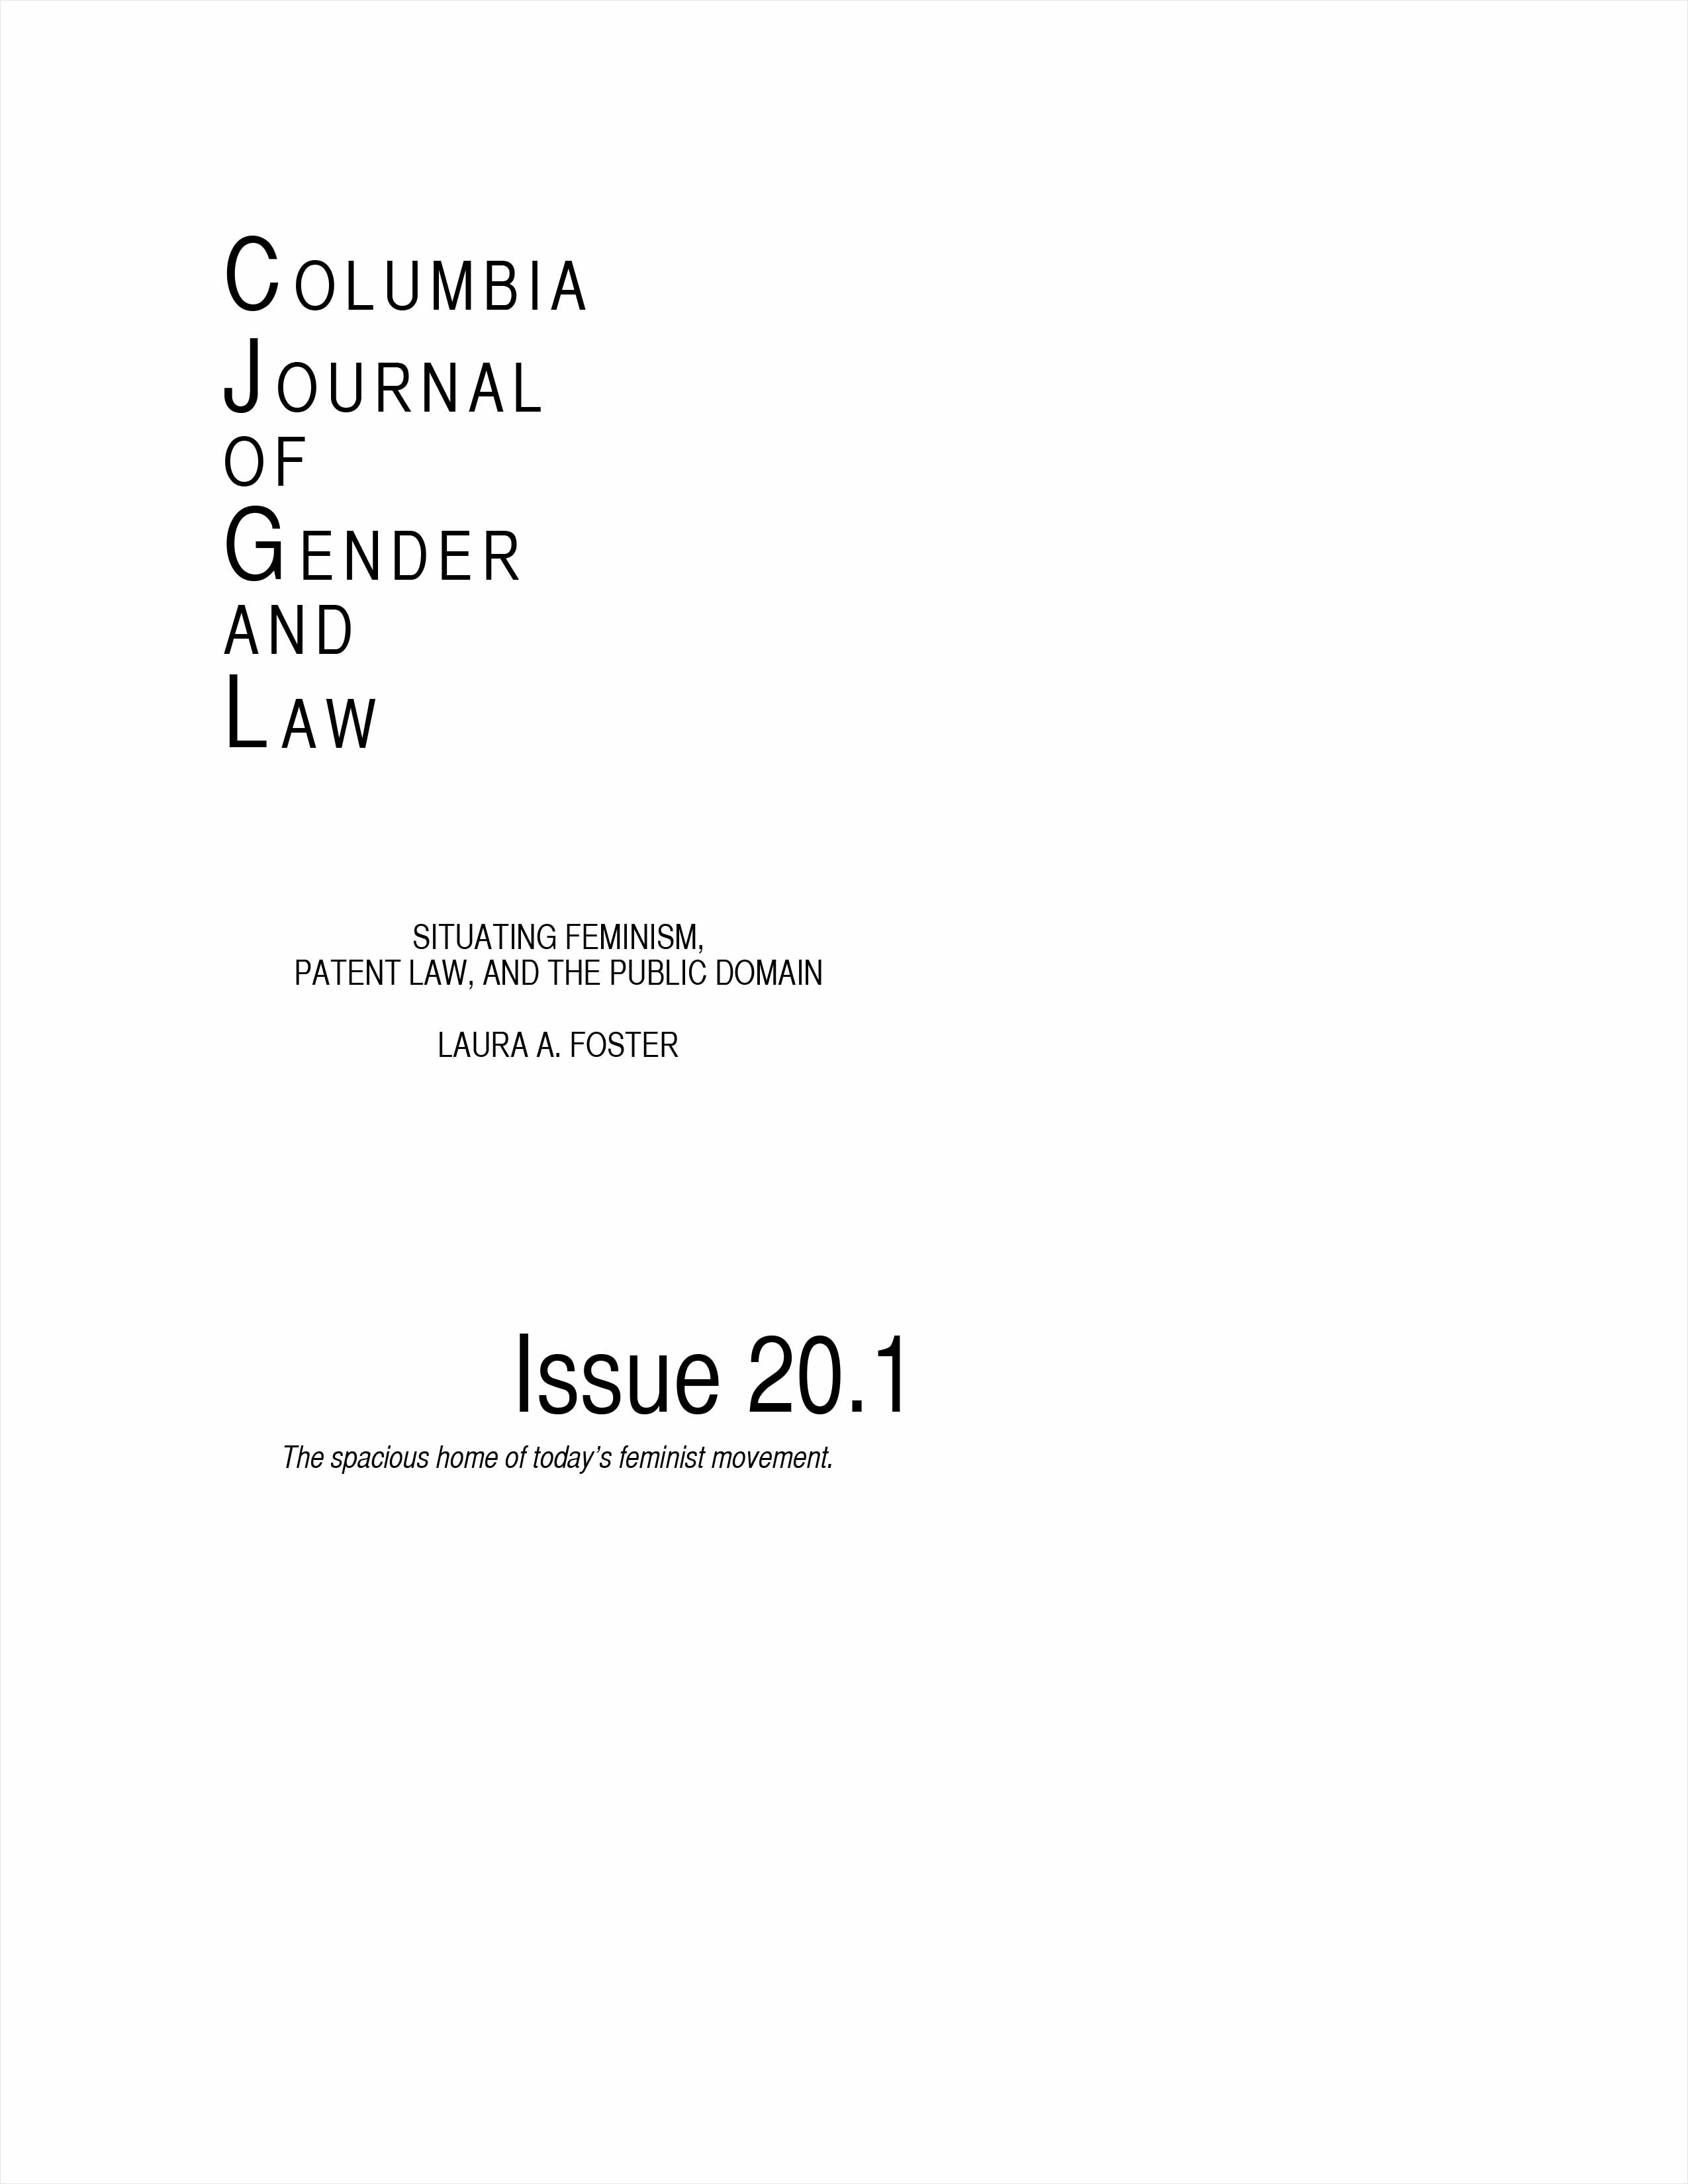 Situating Feminisms, Patent Law, and the Public Domain [Article]